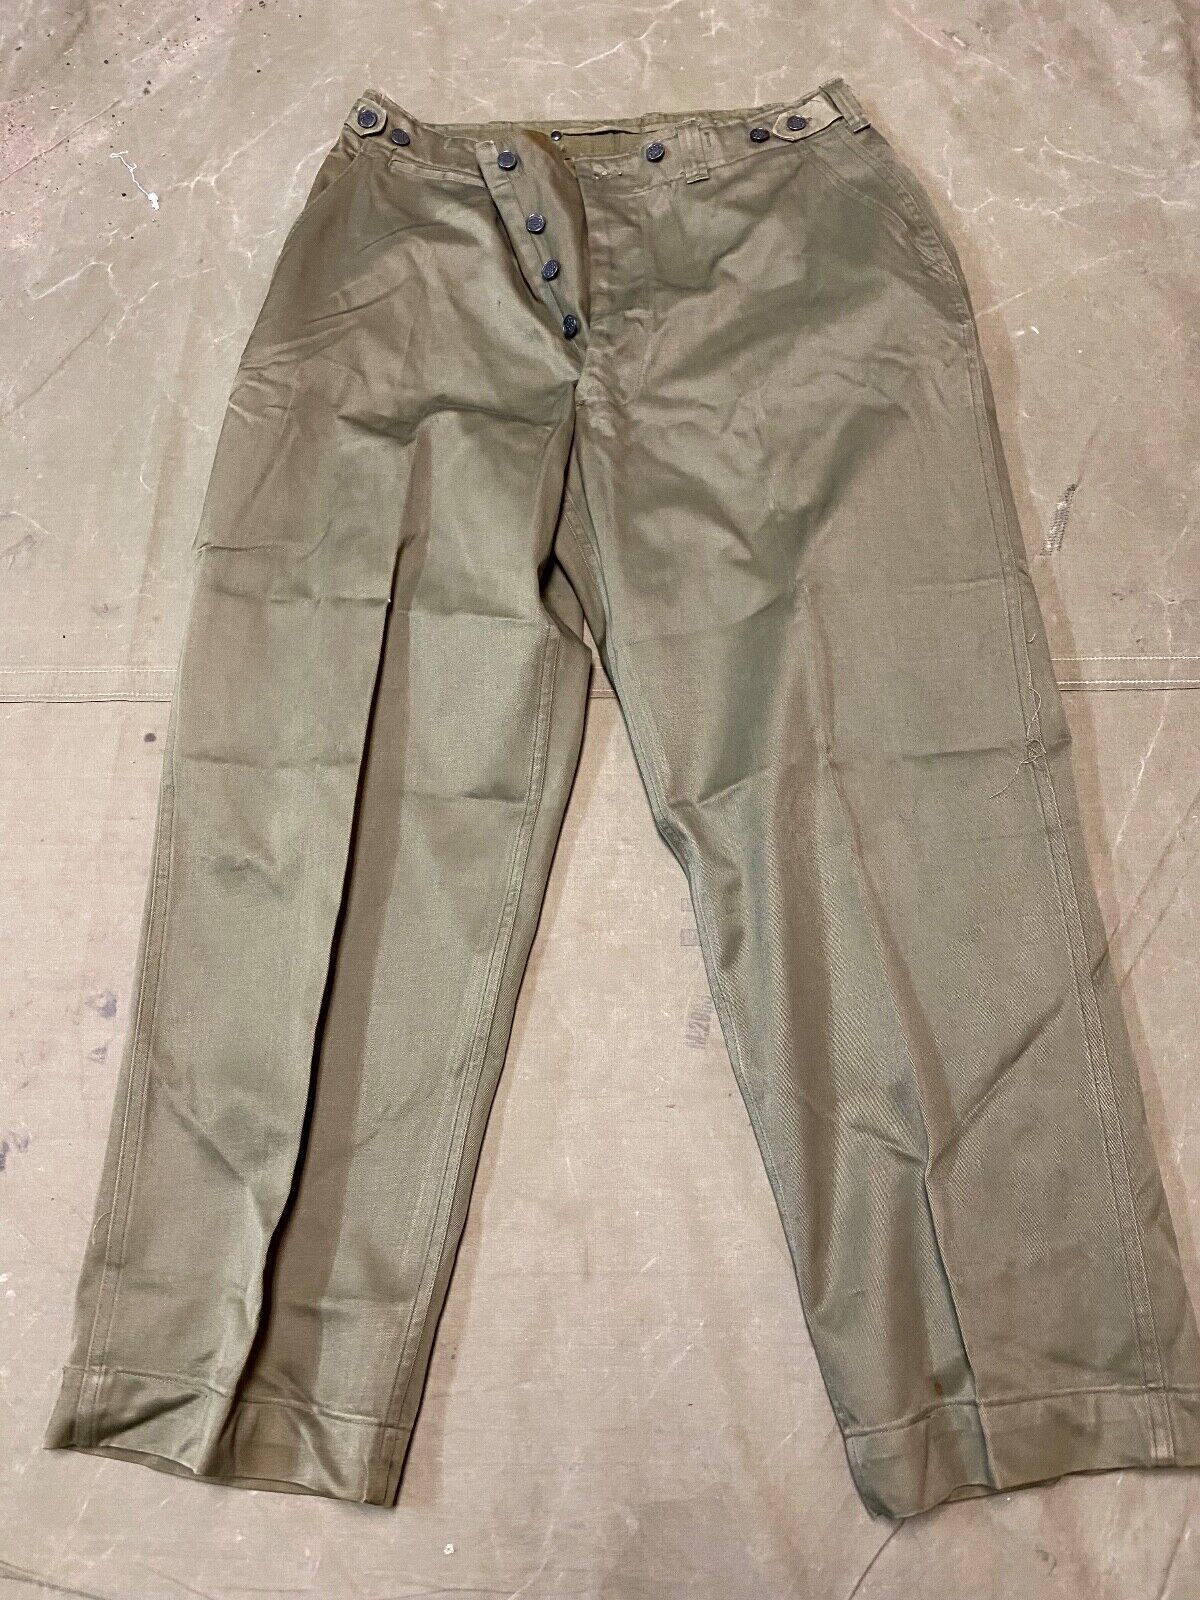 ORIGINAL WWII US ARMY M1943 M43 COMBAT FIELD TROUSERS-SIZE LARGE 36 WAIST